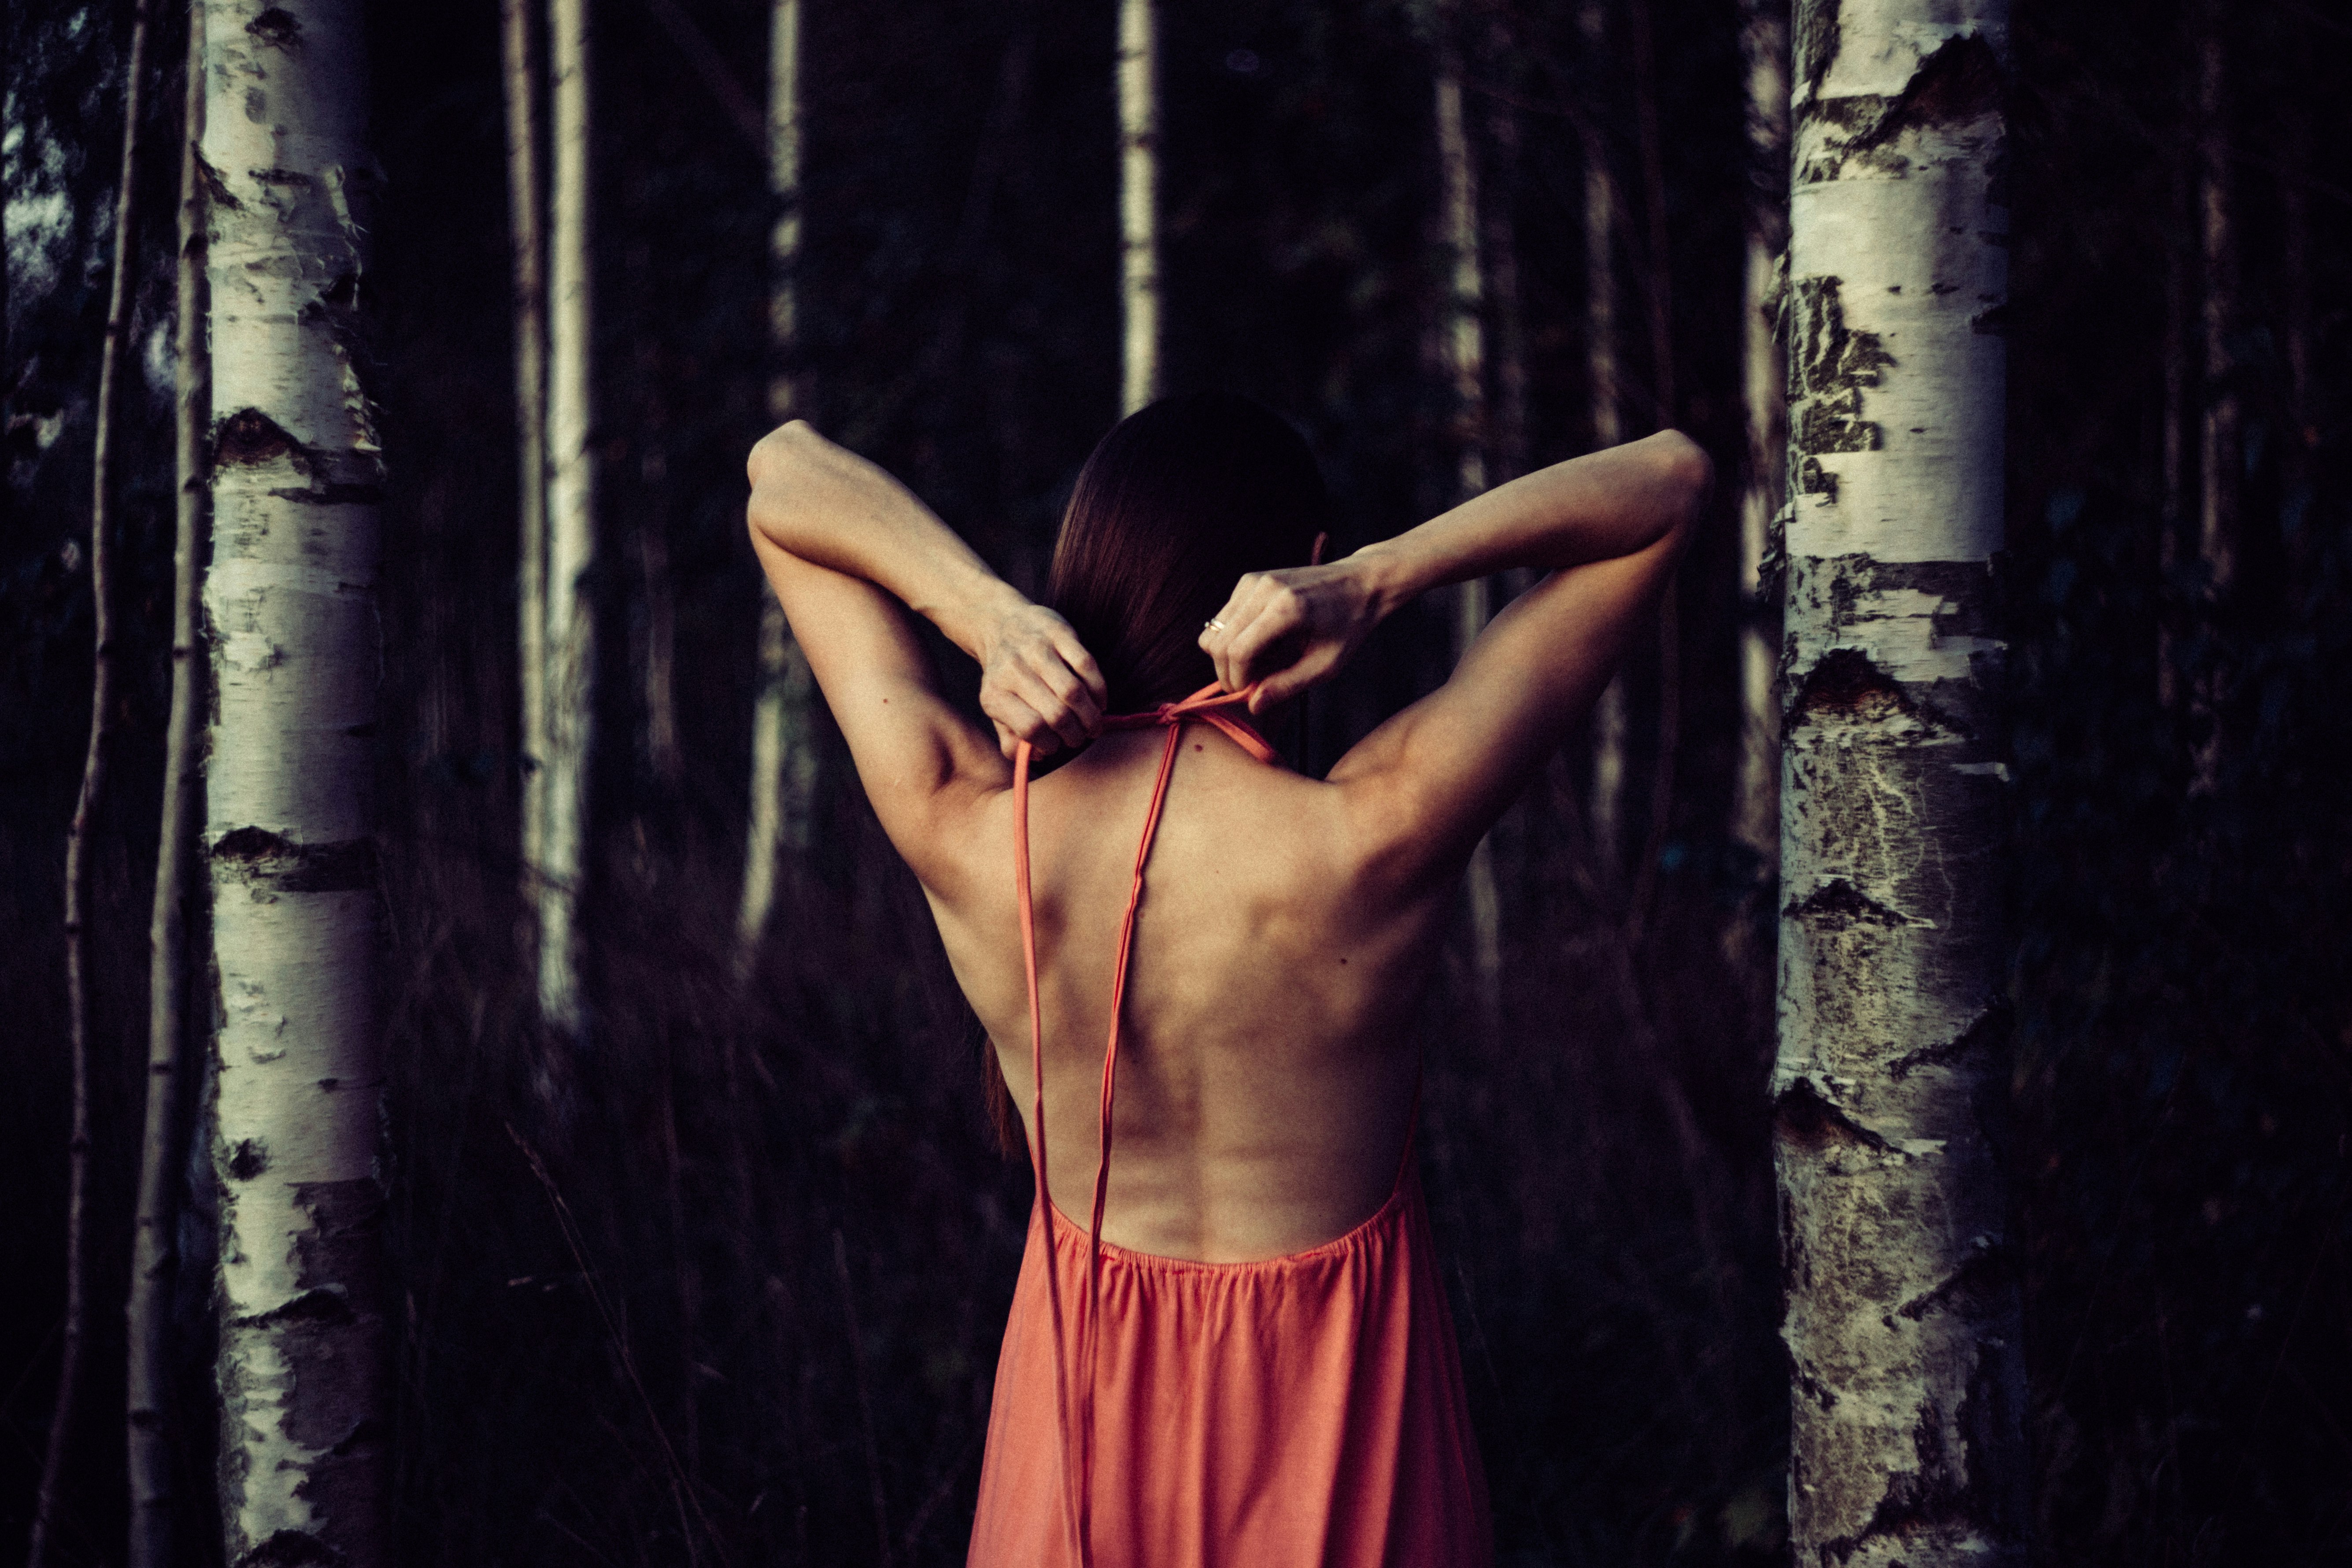 A girl stretching with her arms behind her back inside a forest.